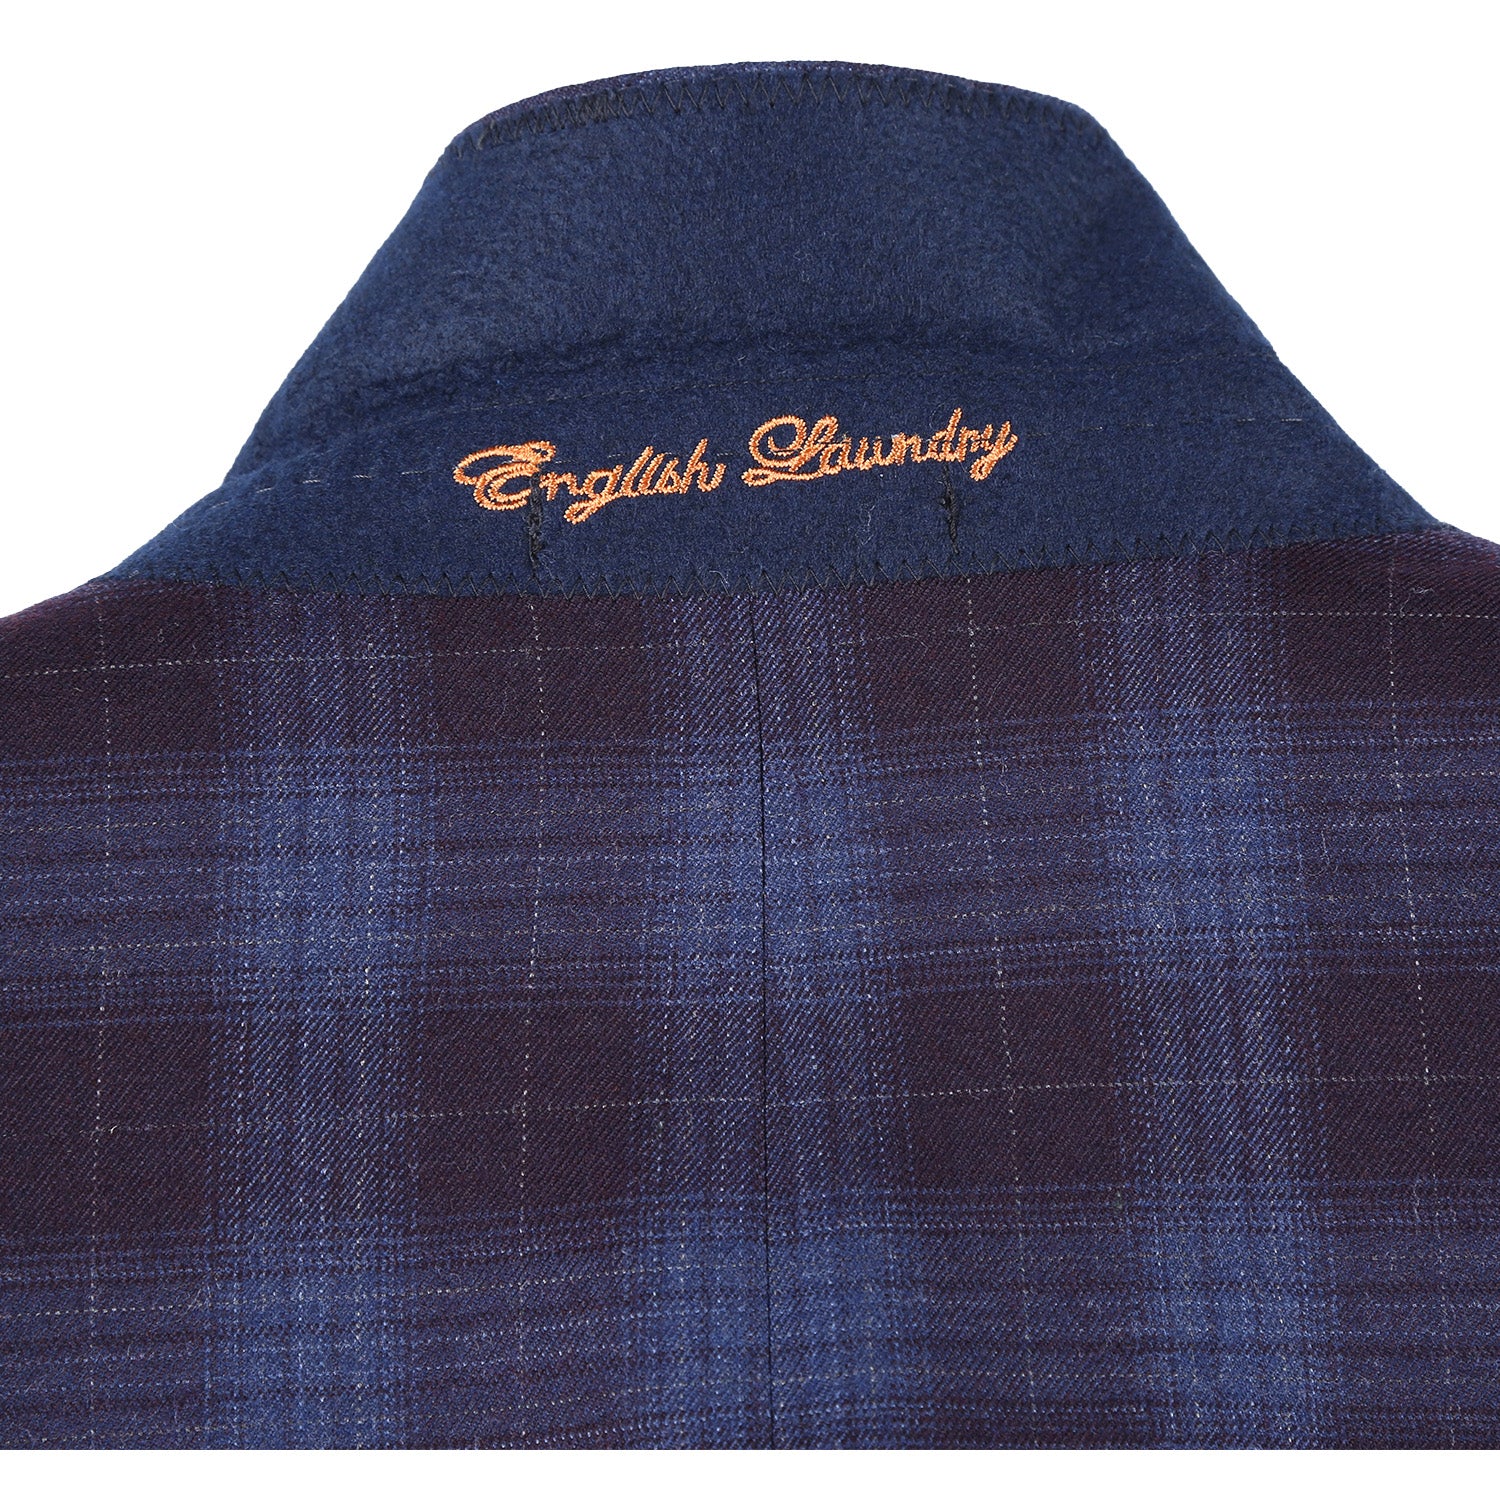 English Laundry Blue with Black Check Wool Suit 5